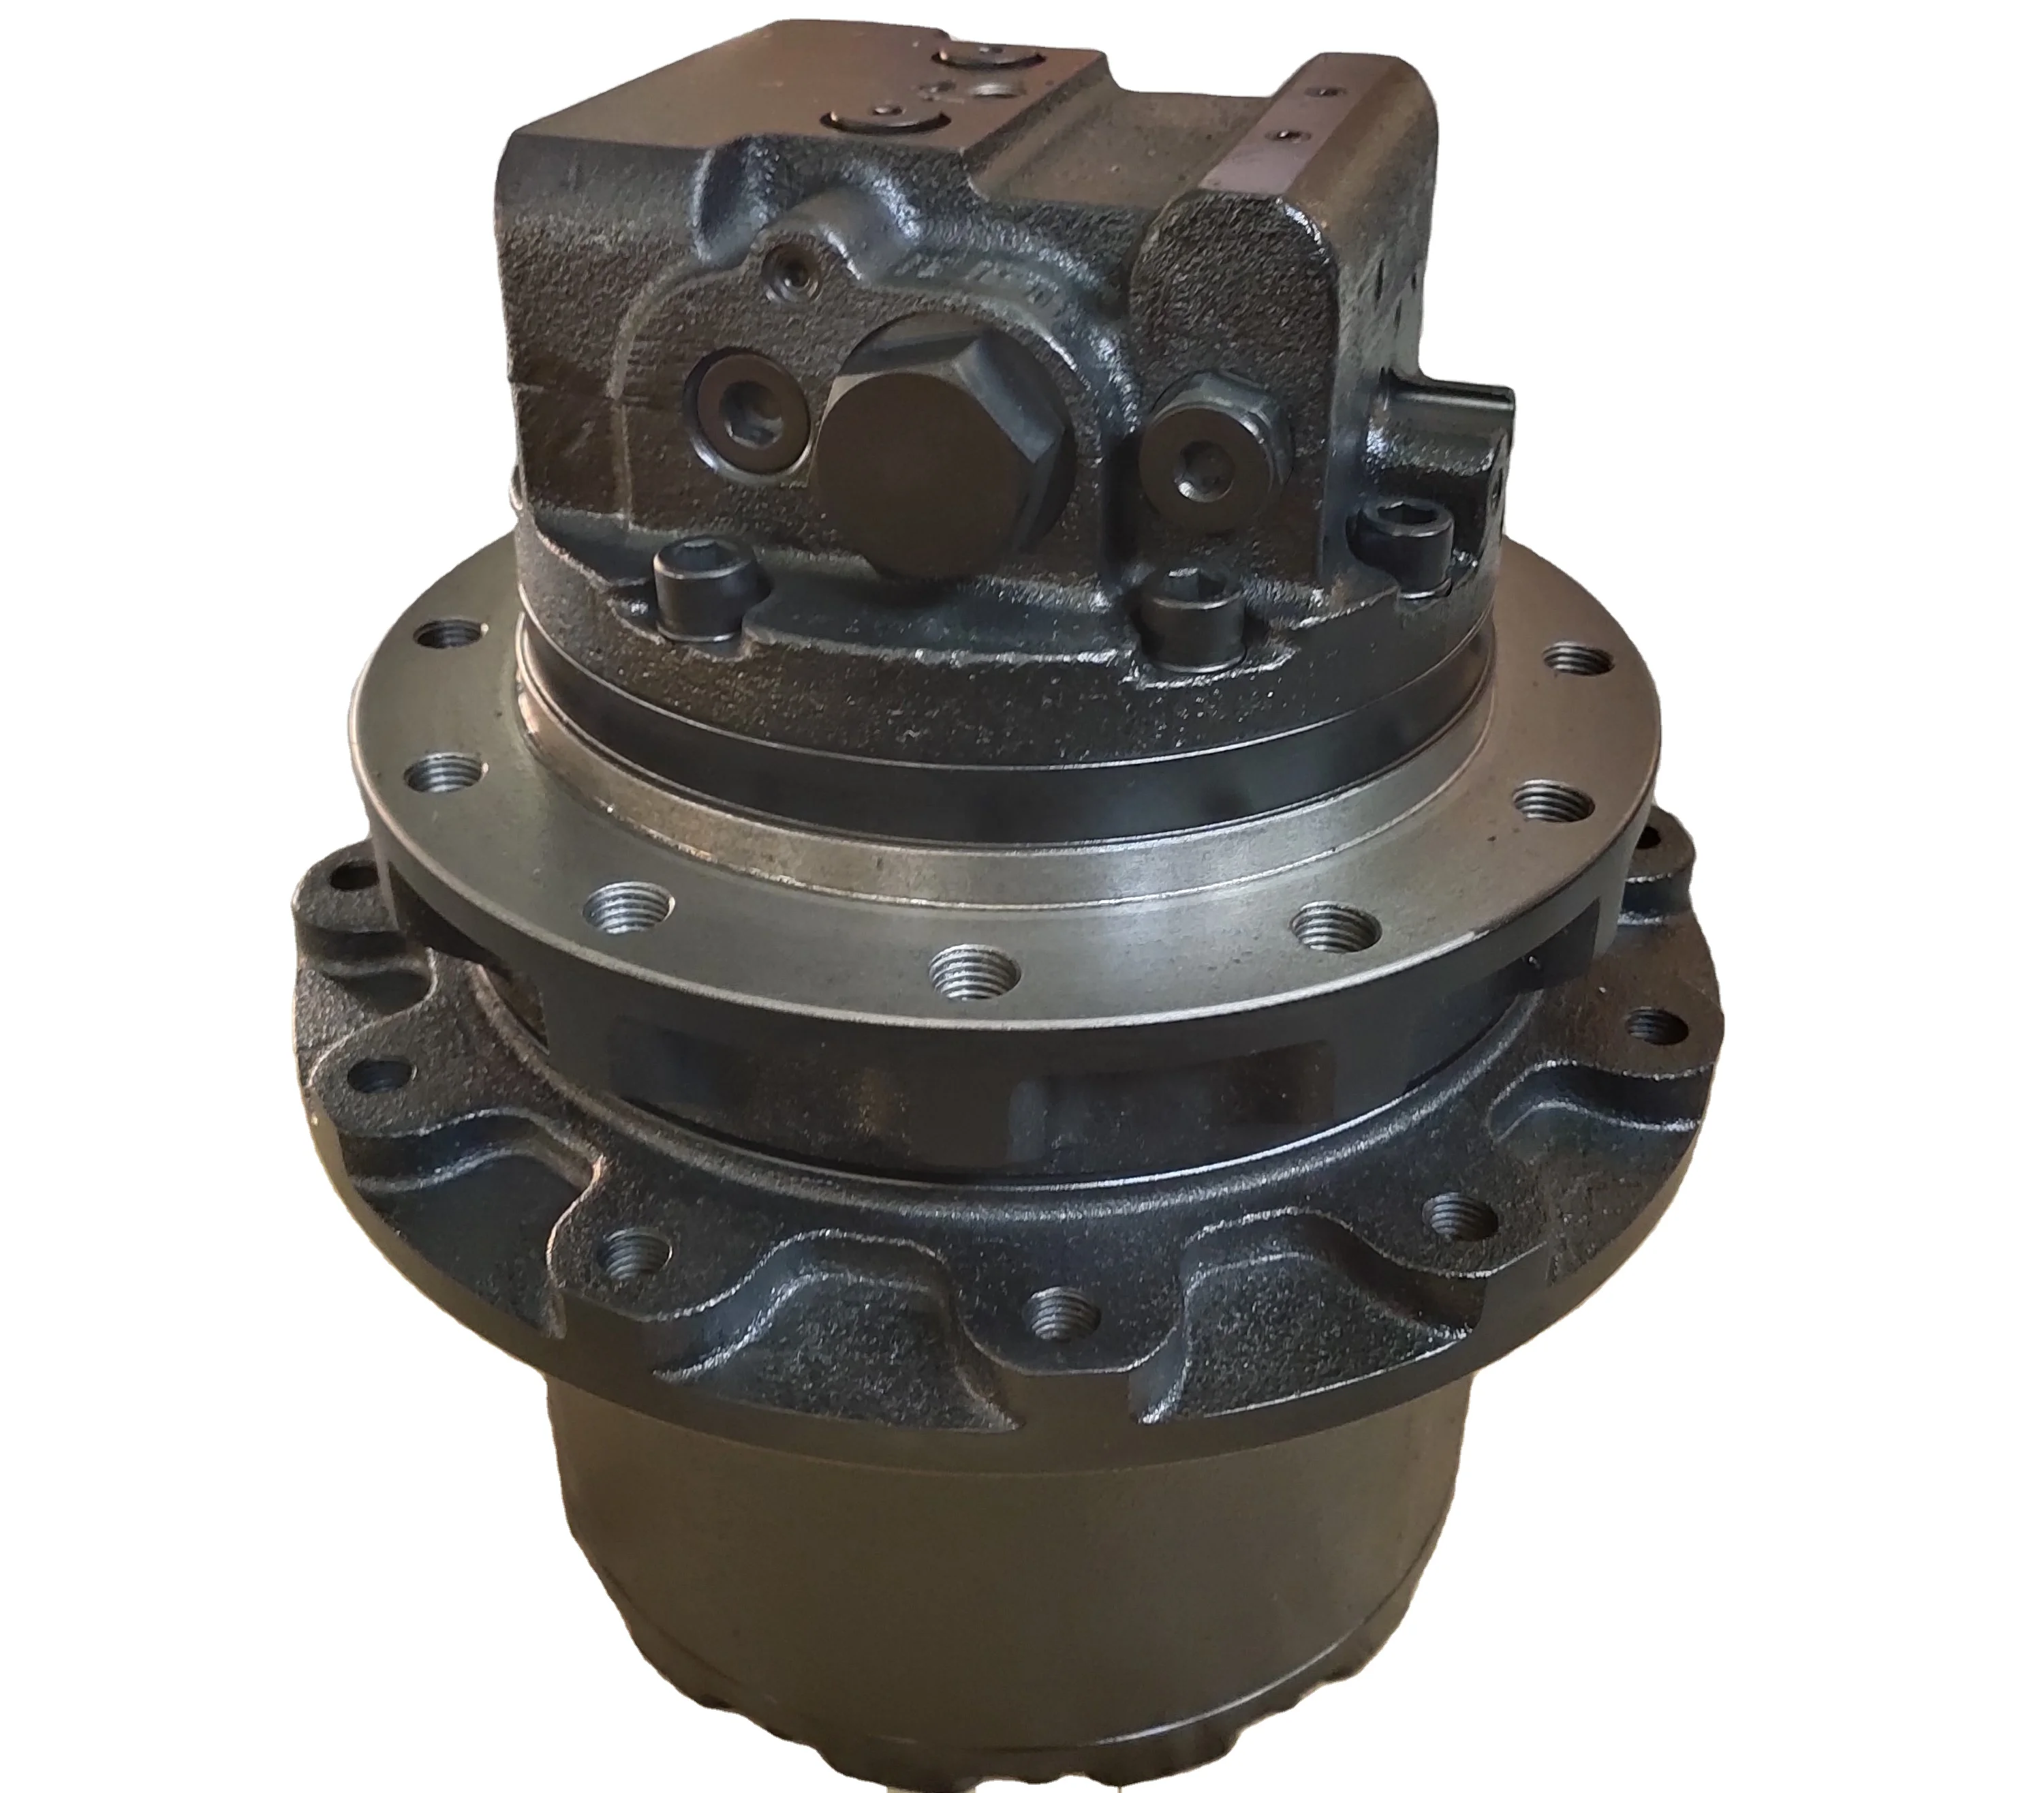 

Hot Selling Quality Excavator Hydraulic Parts 172187-73300 172187-73301 Travel Motor VIO70 Final Drive For YANMAR